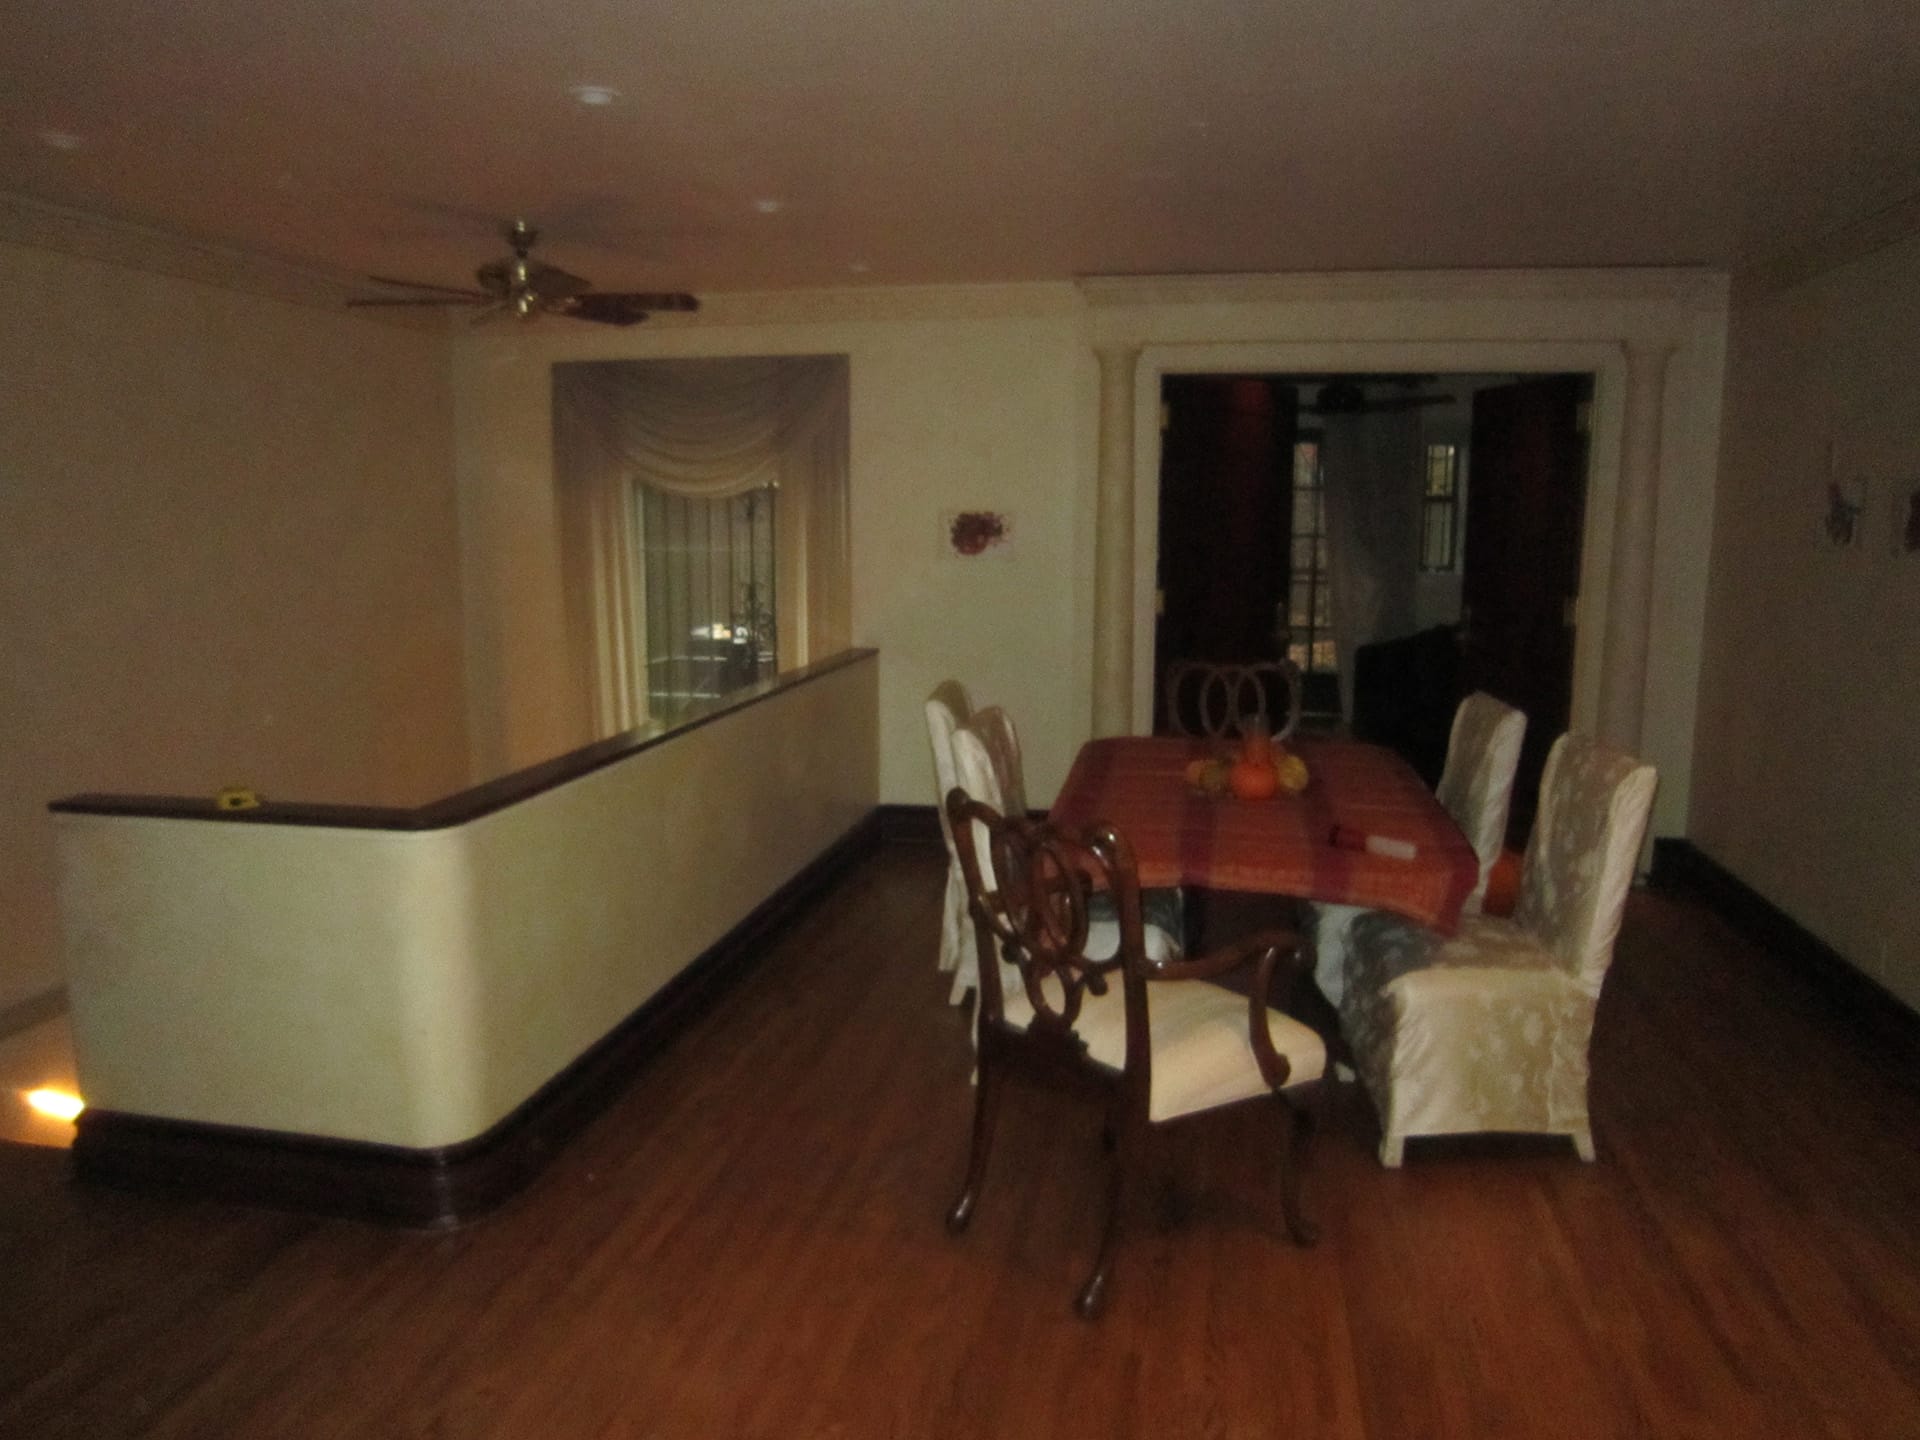 Dining room with mismatched chairs, dark wood floors, and a ceiling fan before our renovation